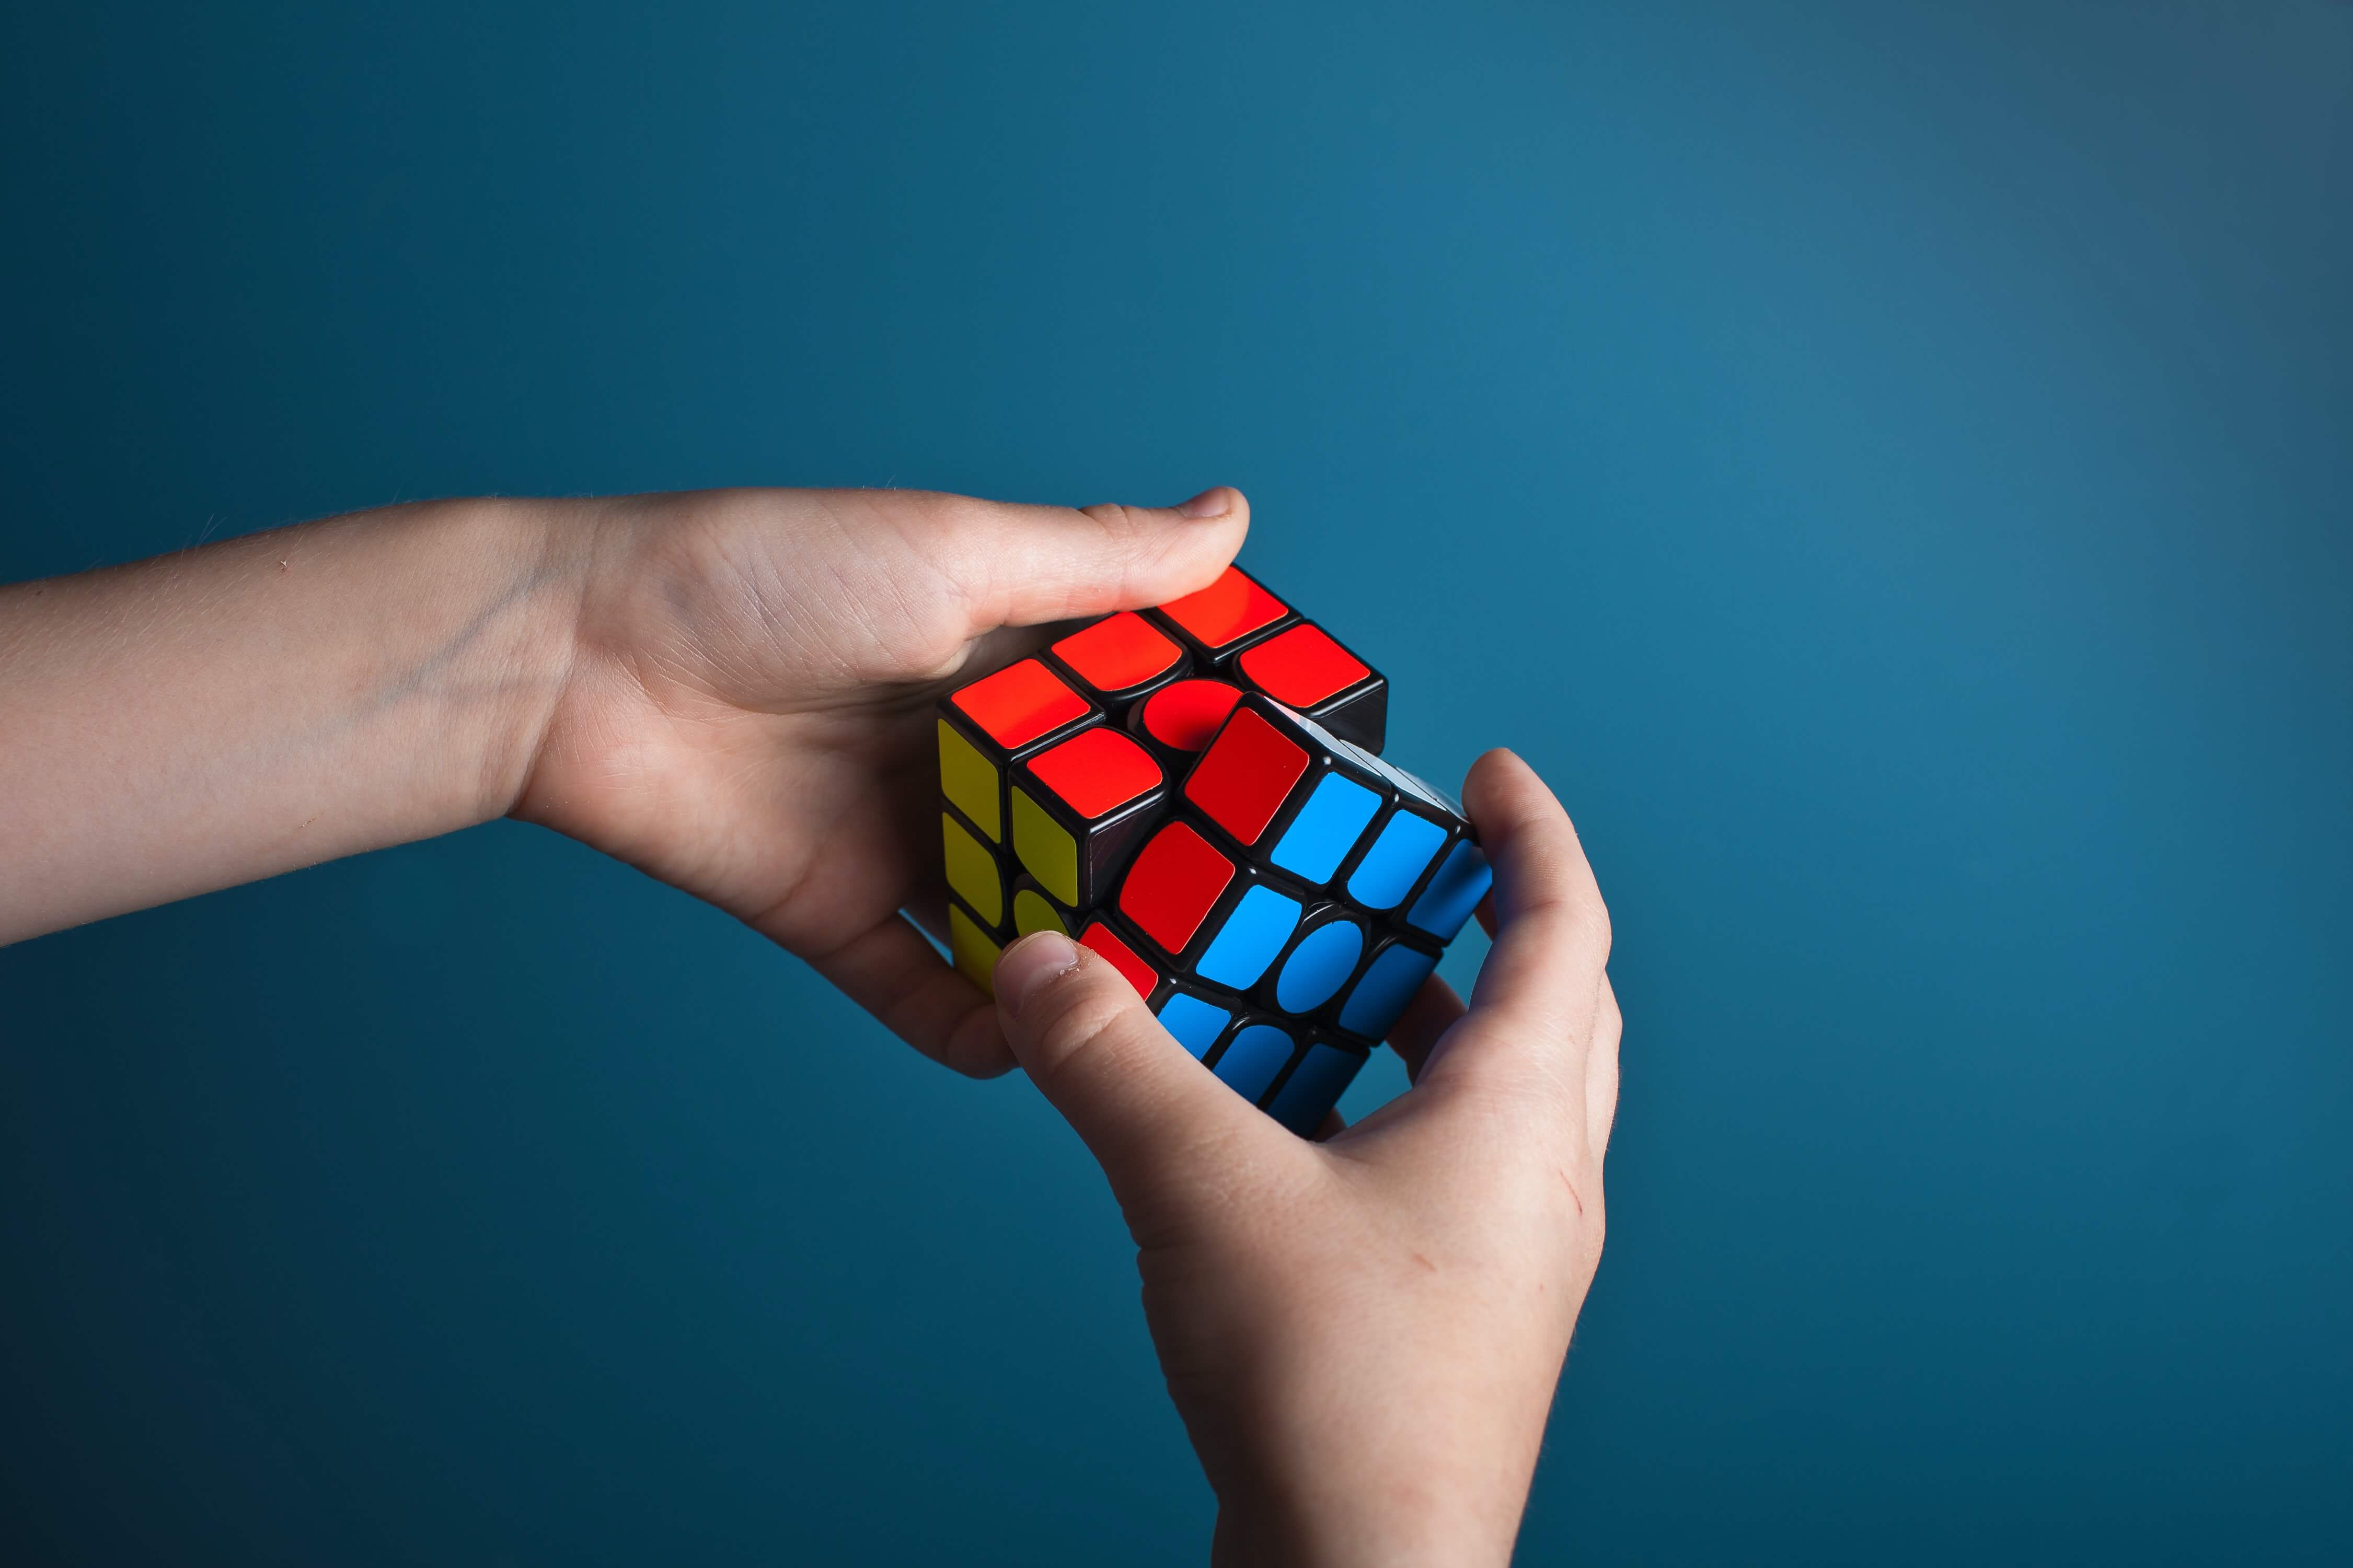 A pair of hands solving a Rubik's cube